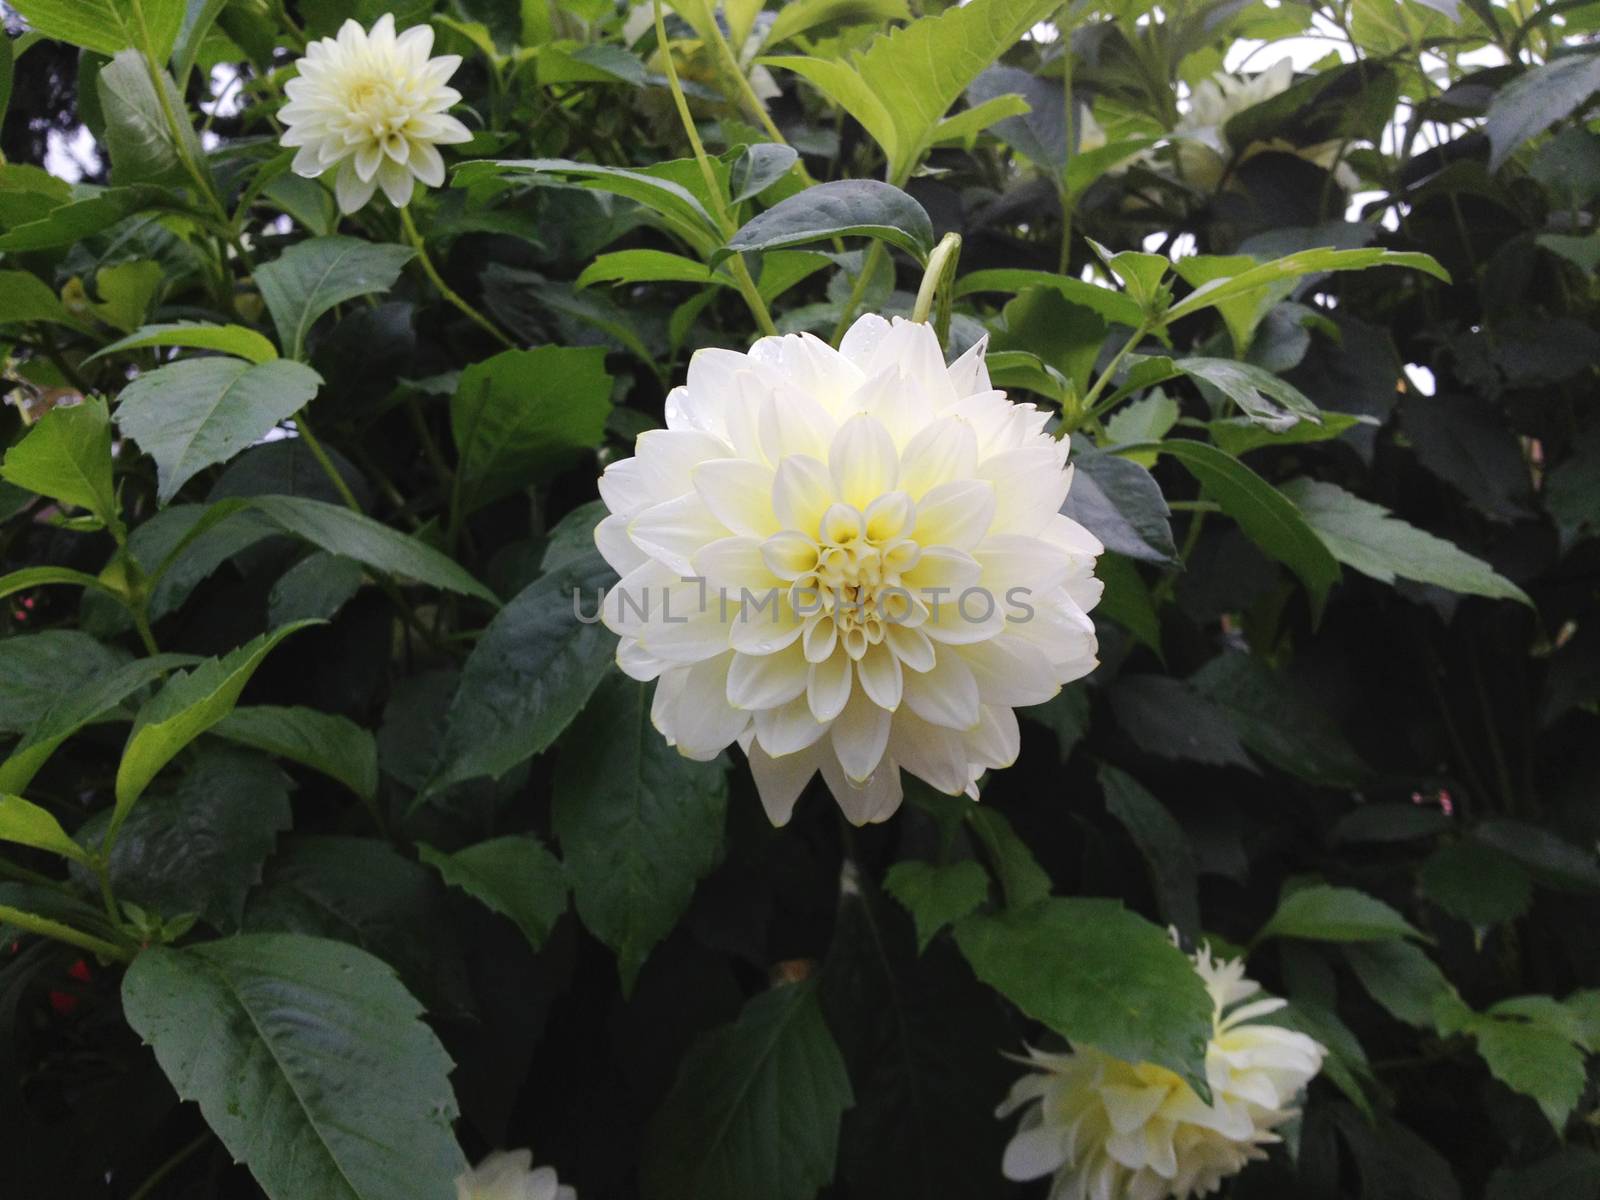 Perft white dahlias flowers in full bloom on the bush in nature